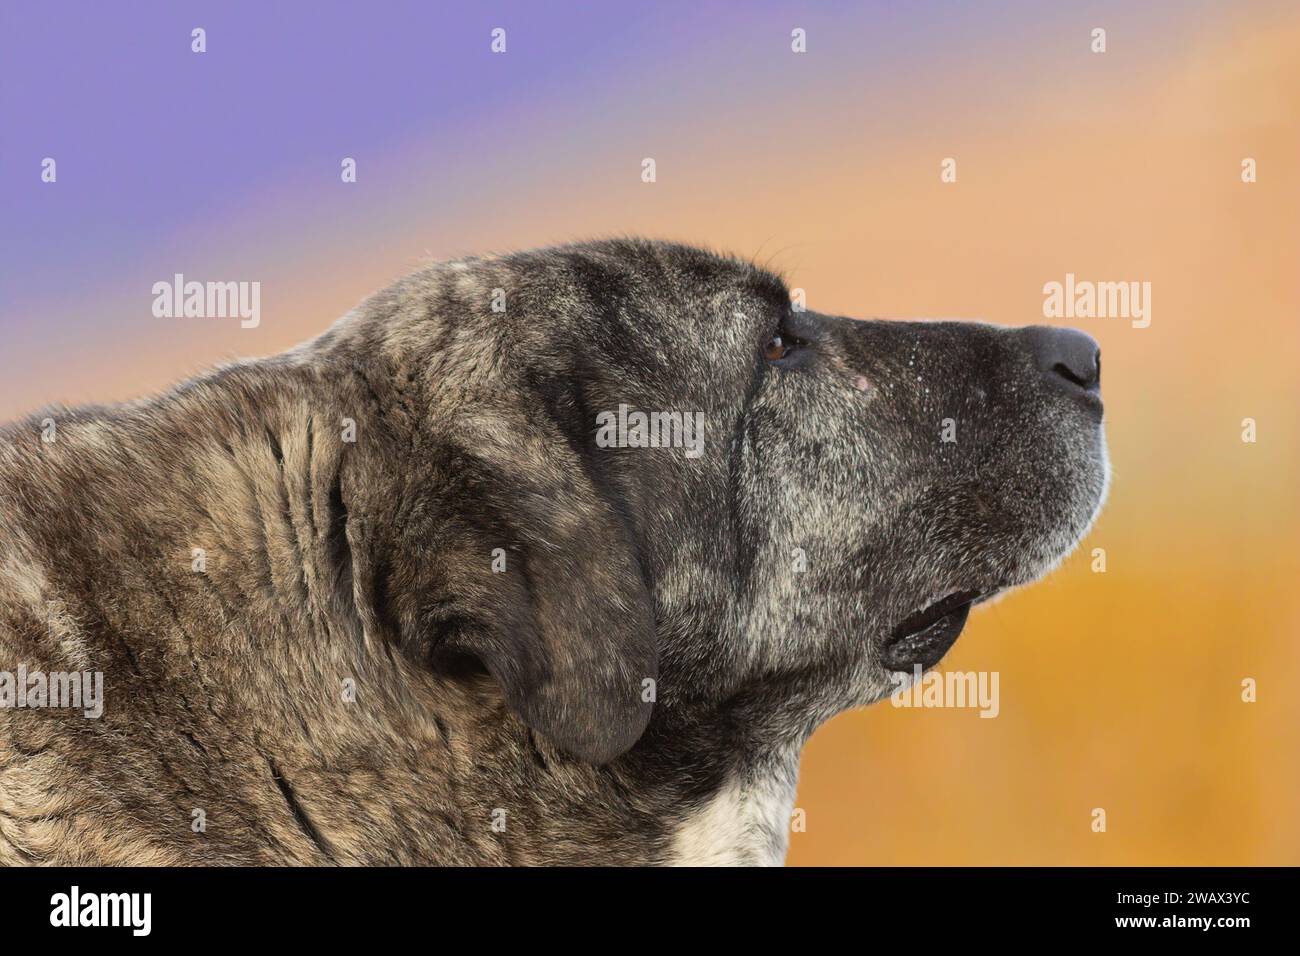 portrait of a kangal dog over colorful out of focus background; closeup on animal’s head; these dogs are very good shepherd guardians against wolves a Stock Photo